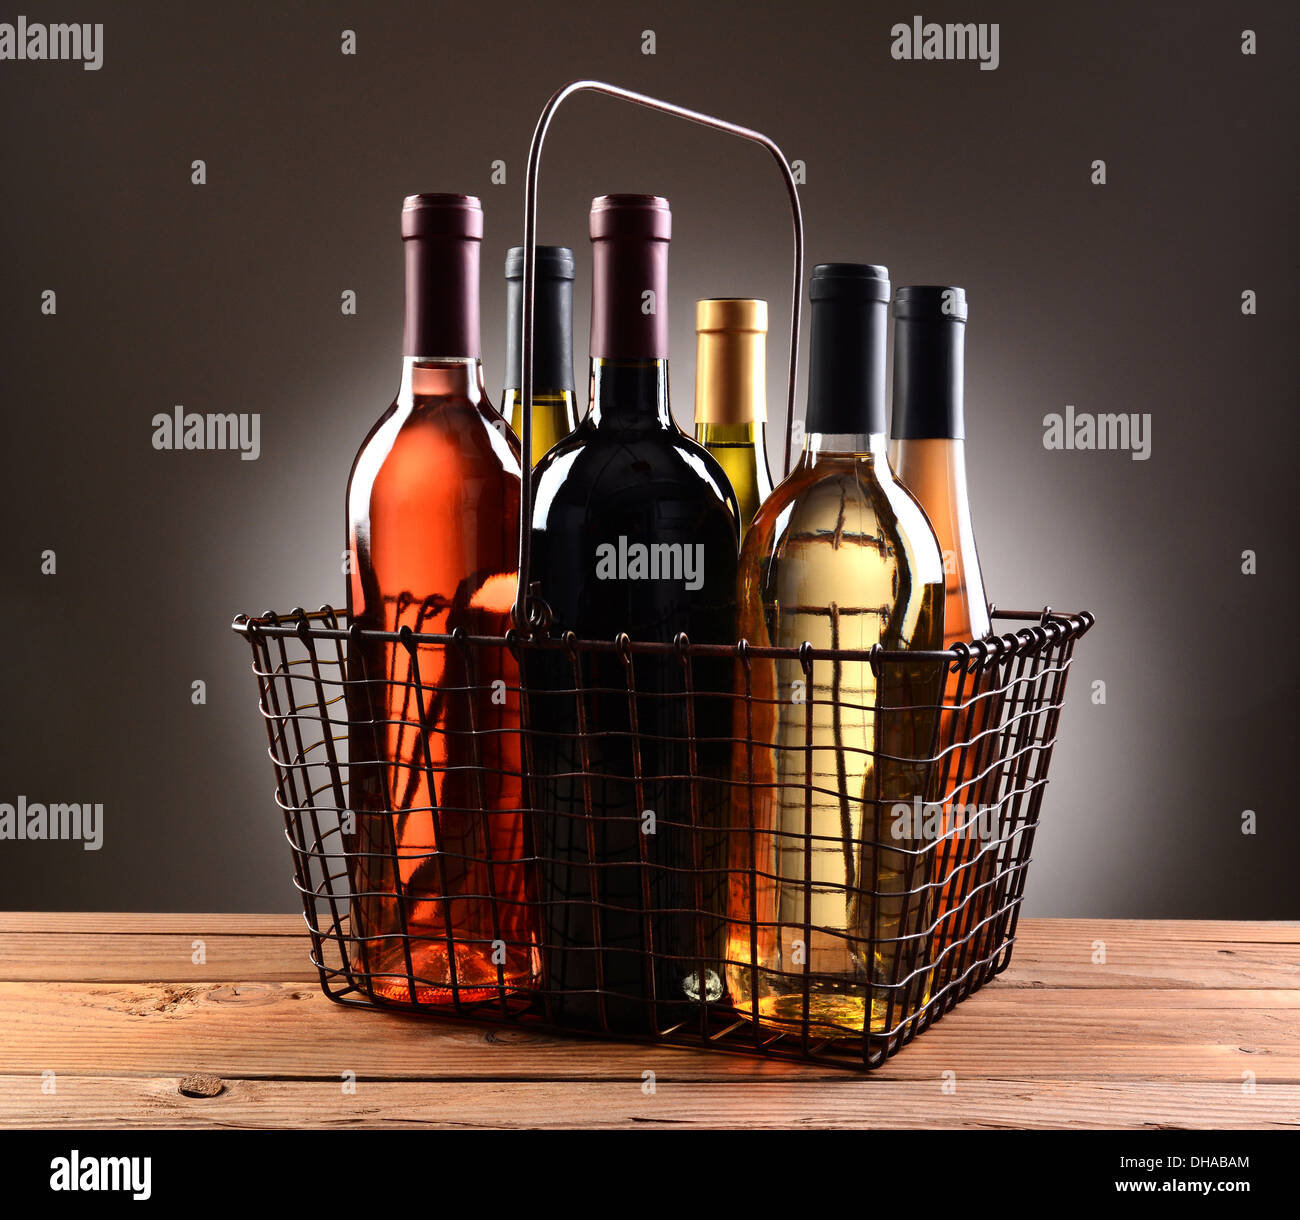 A wire shopping basket filled with assorted wine bottles. The basket is sitting on a rustic wooden table Stock Photo